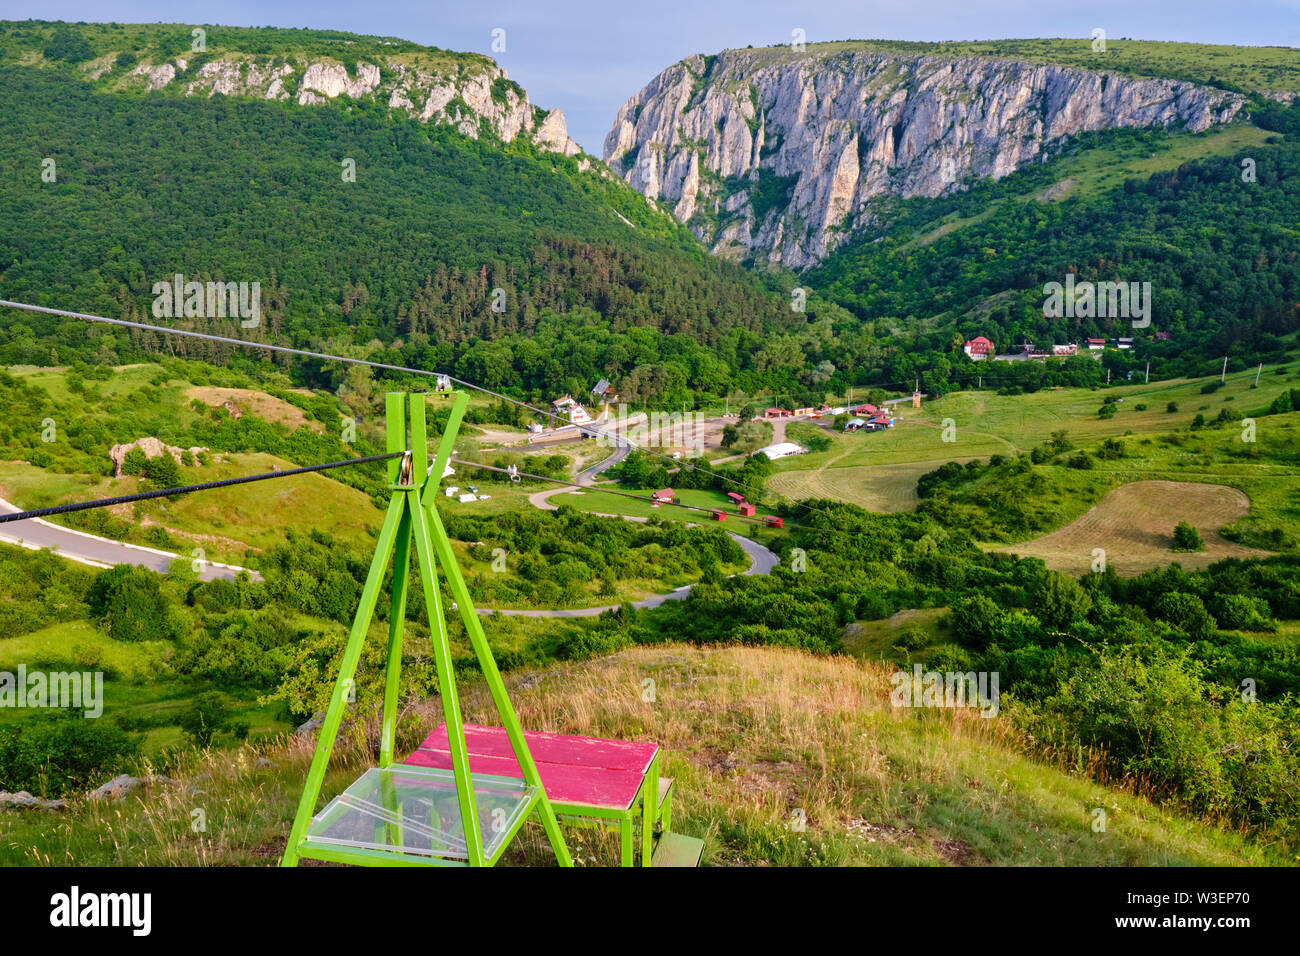 Zipline Base At Turda Gorge Cheile Turzii Cluj County Romania With The Entrance Of The Canyon In The Back At Sunrise In Summer Time View From A Stock Photo Alamy